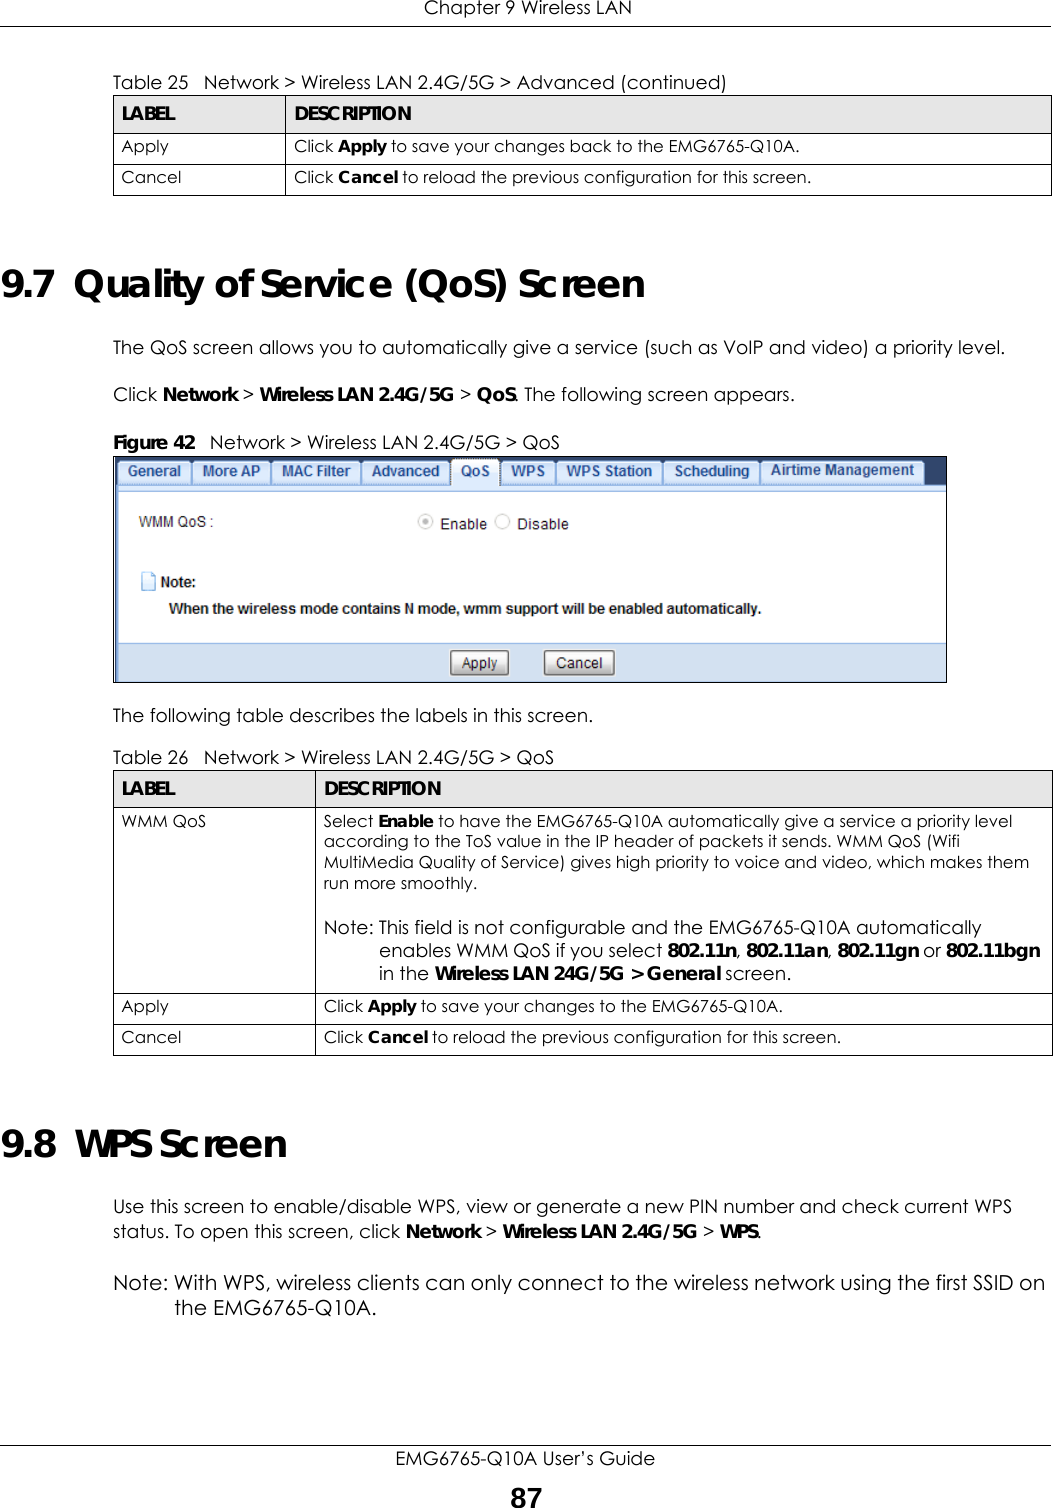  Chapter 9 Wireless LANEMG6765-Q10A User’s Guide879.7  Quality of Service (QoS) ScreenThe QoS screen allows you to automatically give a service (such as VoIP and video) a priority level.Click Network &gt; Wireless LAN 2.4G/5G &gt; QoS. The following screen appears.Figure 42   Network &gt; Wireless LAN 2.4G/5G &gt; QoS The following table describes the labels in this screen. 9.8  WPS ScreenUse this screen to enable/disable WPS, view or generate a new PIN number and check current WPS status. To open this screen, click Network &gt; Wireless LAN 2.4G/5G &gt; WPS.Note: With WPS, wireless clients can only connect to the wireless network using the first SSID on the EMG6765-Q10A.Apply Click Apply to save your changes back to the EMG6765-Q10A.Cancel Click Cancel to reload the previous configuration for this screen.Table 25   Network &gt; Wireless LAN 2.4G/5G &gt; Advanced (continued)LABEL DESCRIPTIONTable 26   Network &gt; Wireless LAN 2.4G/5G &gt; QoSLABEL DESCRIPTIONWMM QoS Select Enable to have the EMG6765-Q10A automatically give a service a priority level according to the ToS value in the IP header of packets it sends. WMM QoS (Wifi MultiMedia Quality of Service) gives high priority to voice and video, which makes them run more smoothly.Note: This field is not configurable and the EMG6765-Q10A automatically enables WMM QoS if you select 802.11n, 802.11an, 802.11gn or 802.11bgn in the Wireless LAN 24G/5G &gt; General screen.Apply Click Apply to save your changes to the EMG6765-Q10A.Cancel Click Cancel to reload the previous configuration for this screen.